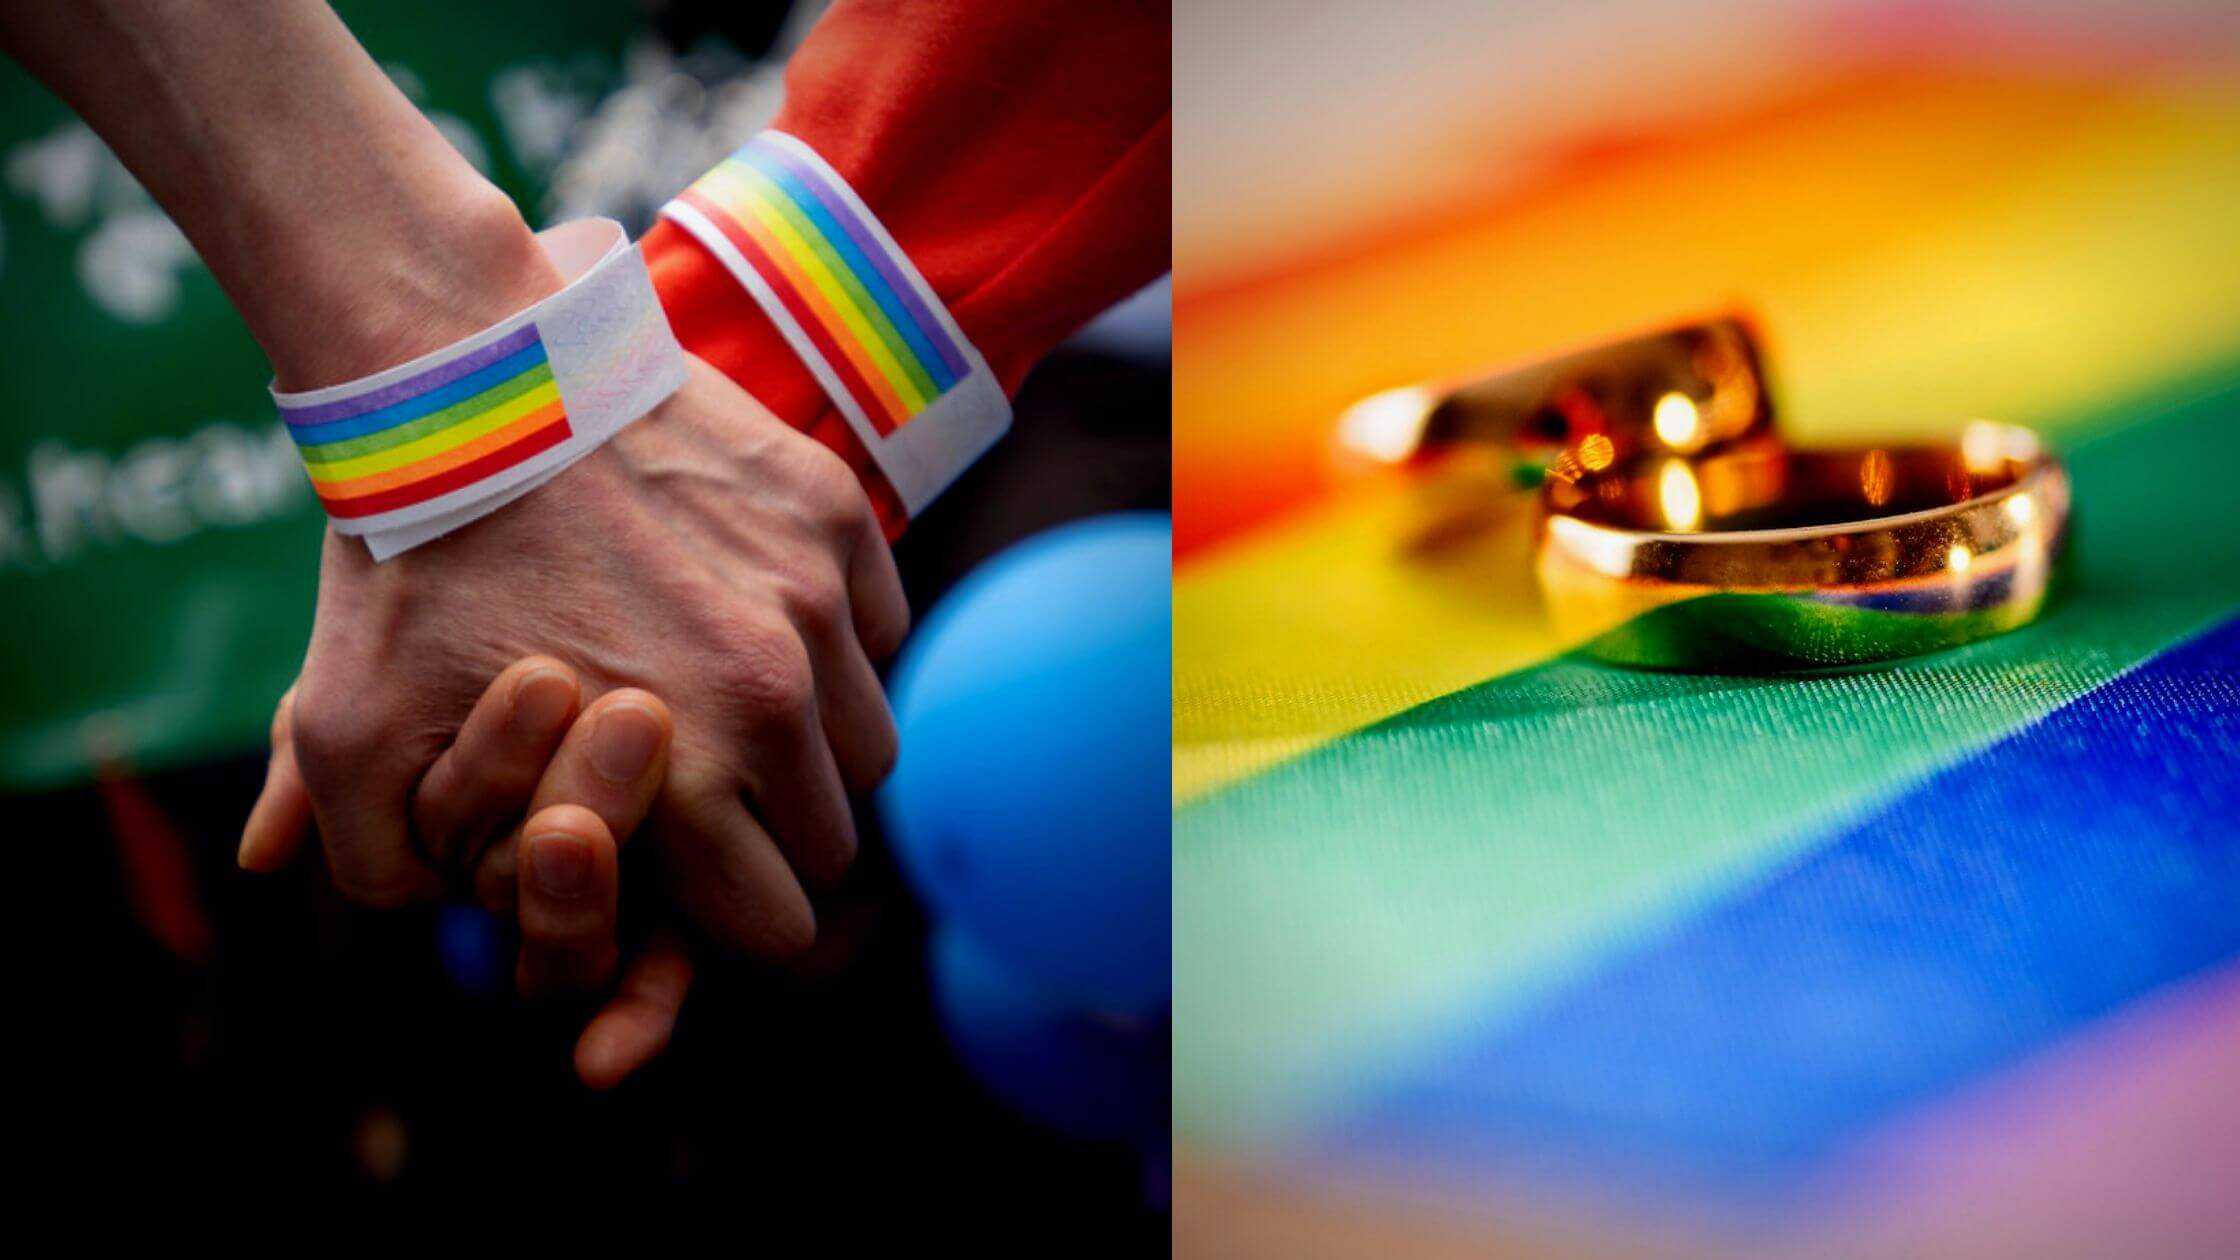 Senate Approves Respect For Marriage Act, Protecting Same-Sex Couples